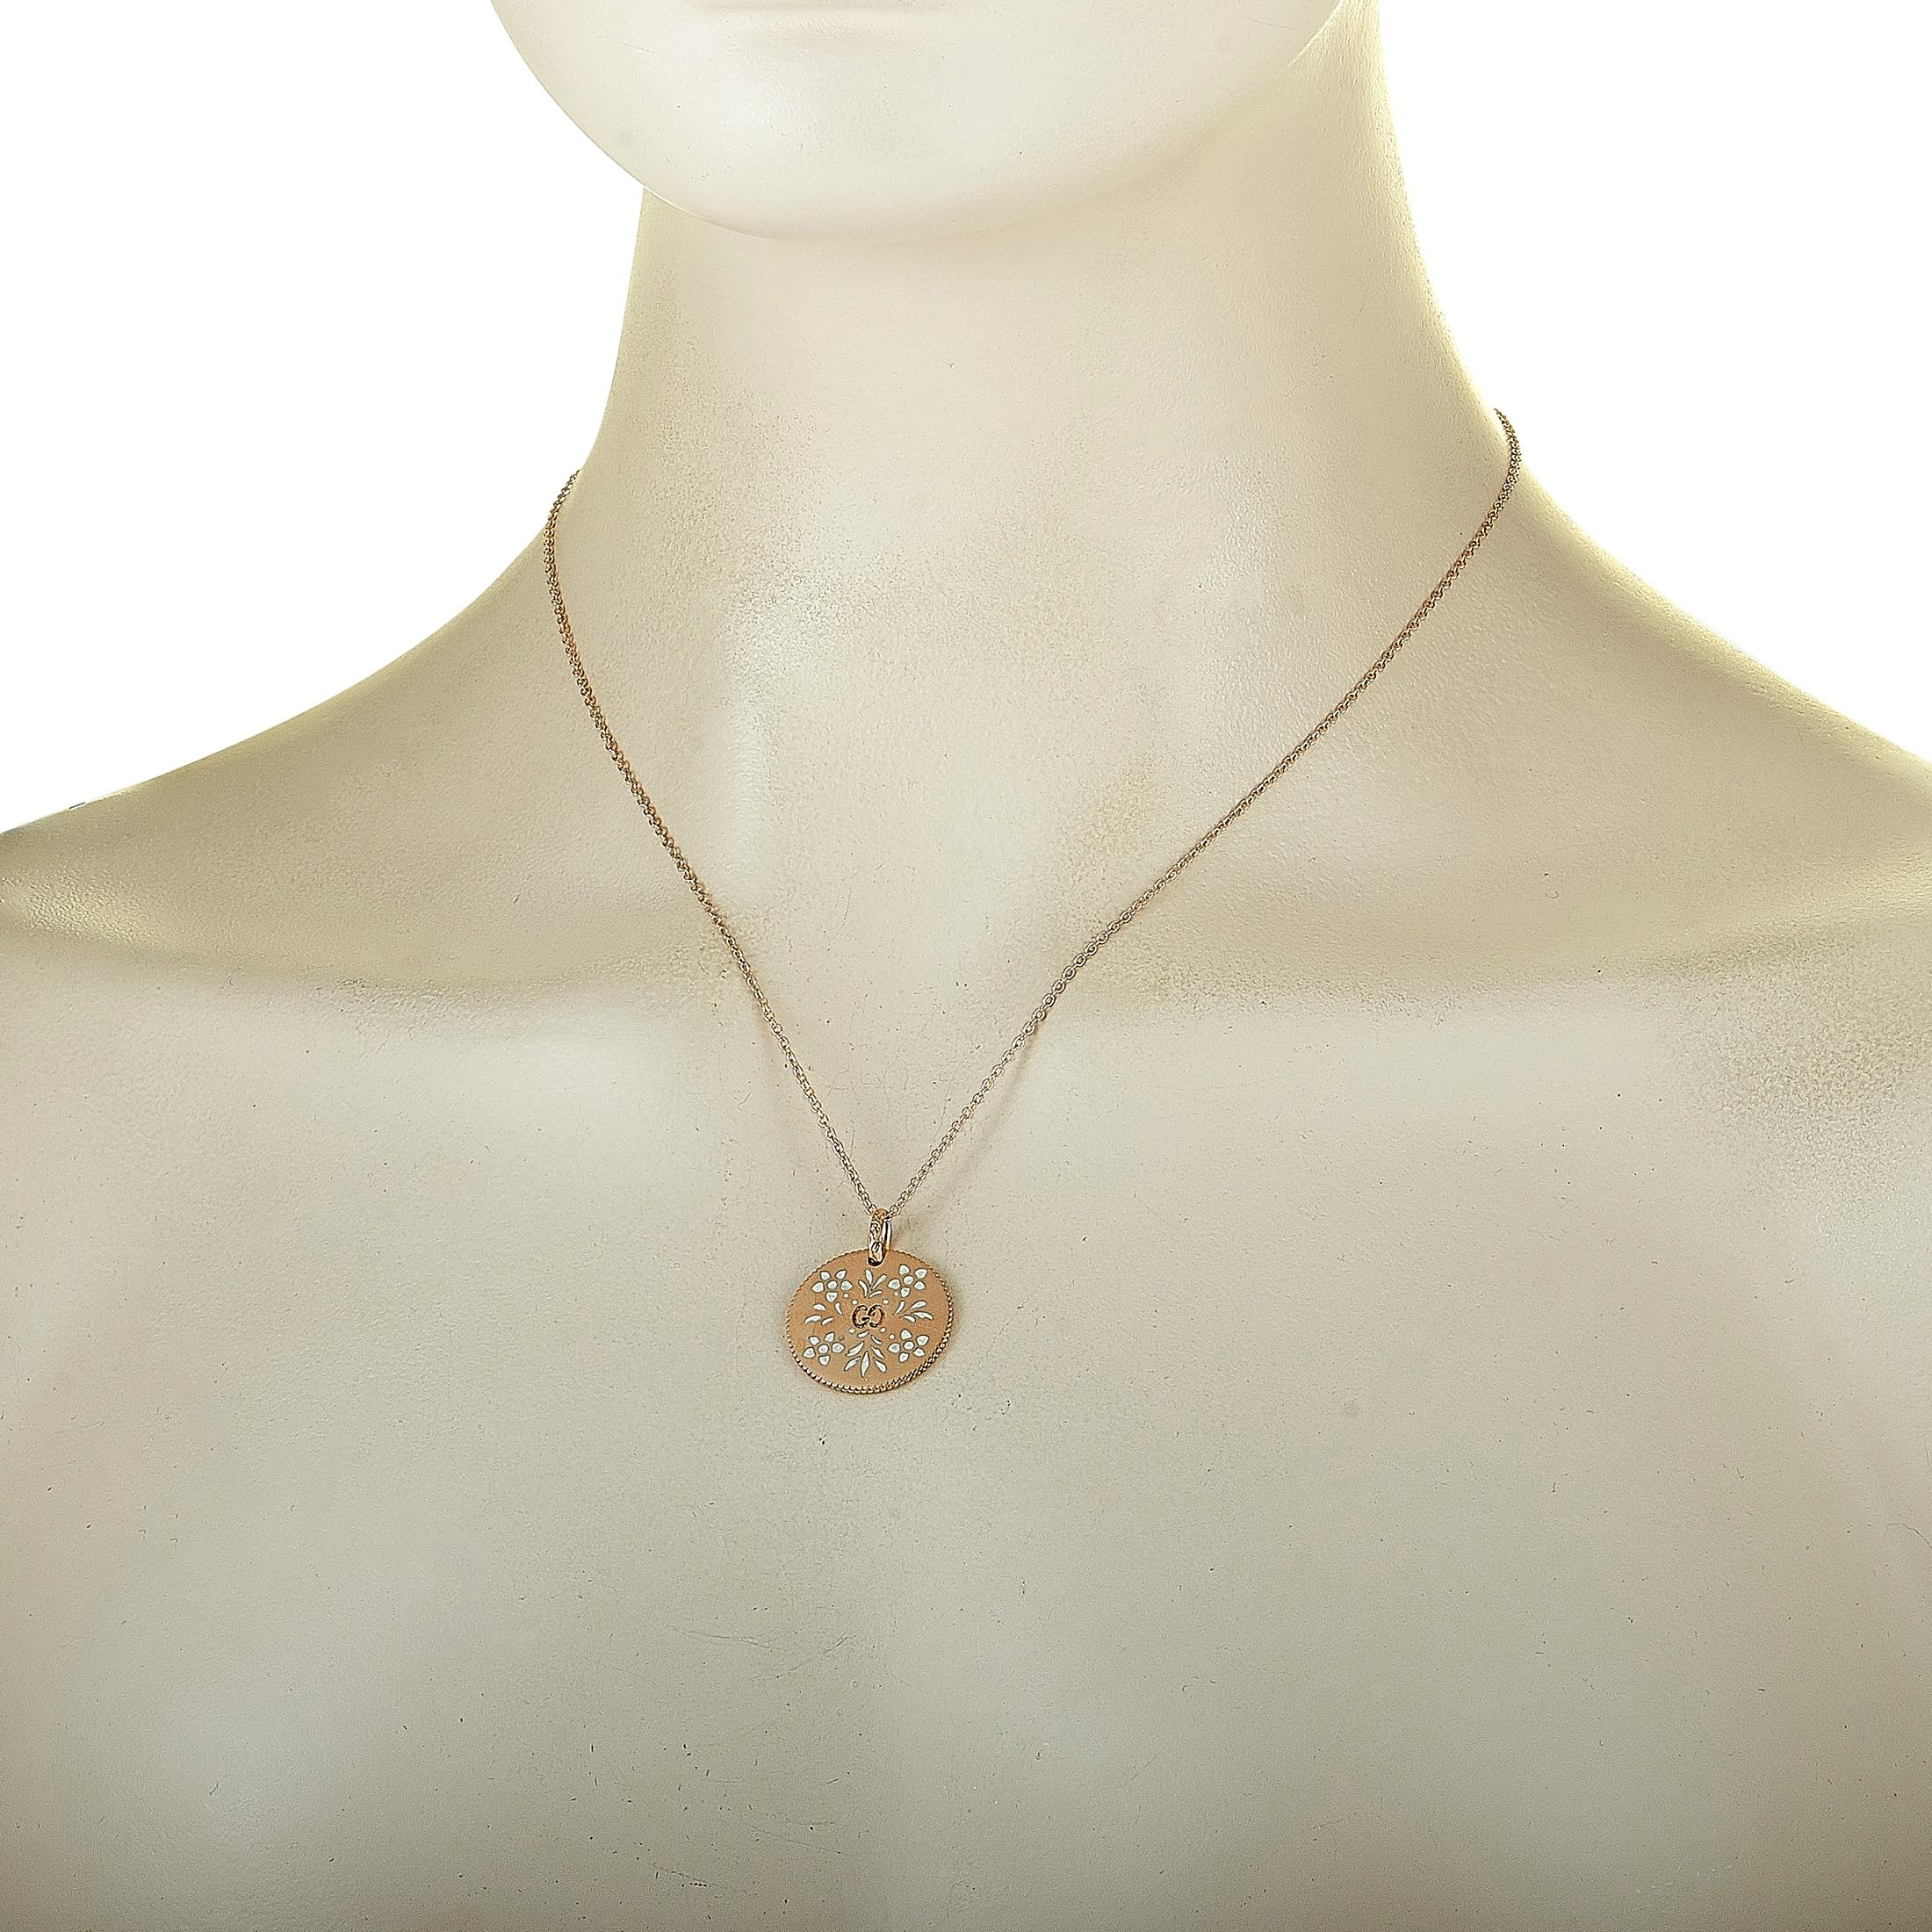 The Gucci “Icon Blooms” necklace is made out of 18K rose gold and white enamel and weighs 7 grams. The necklace boasts an 18” chain and a pendant that measures 1” in length and 0.80” in width.
 
 This jewelry piece is offered in brand new condition